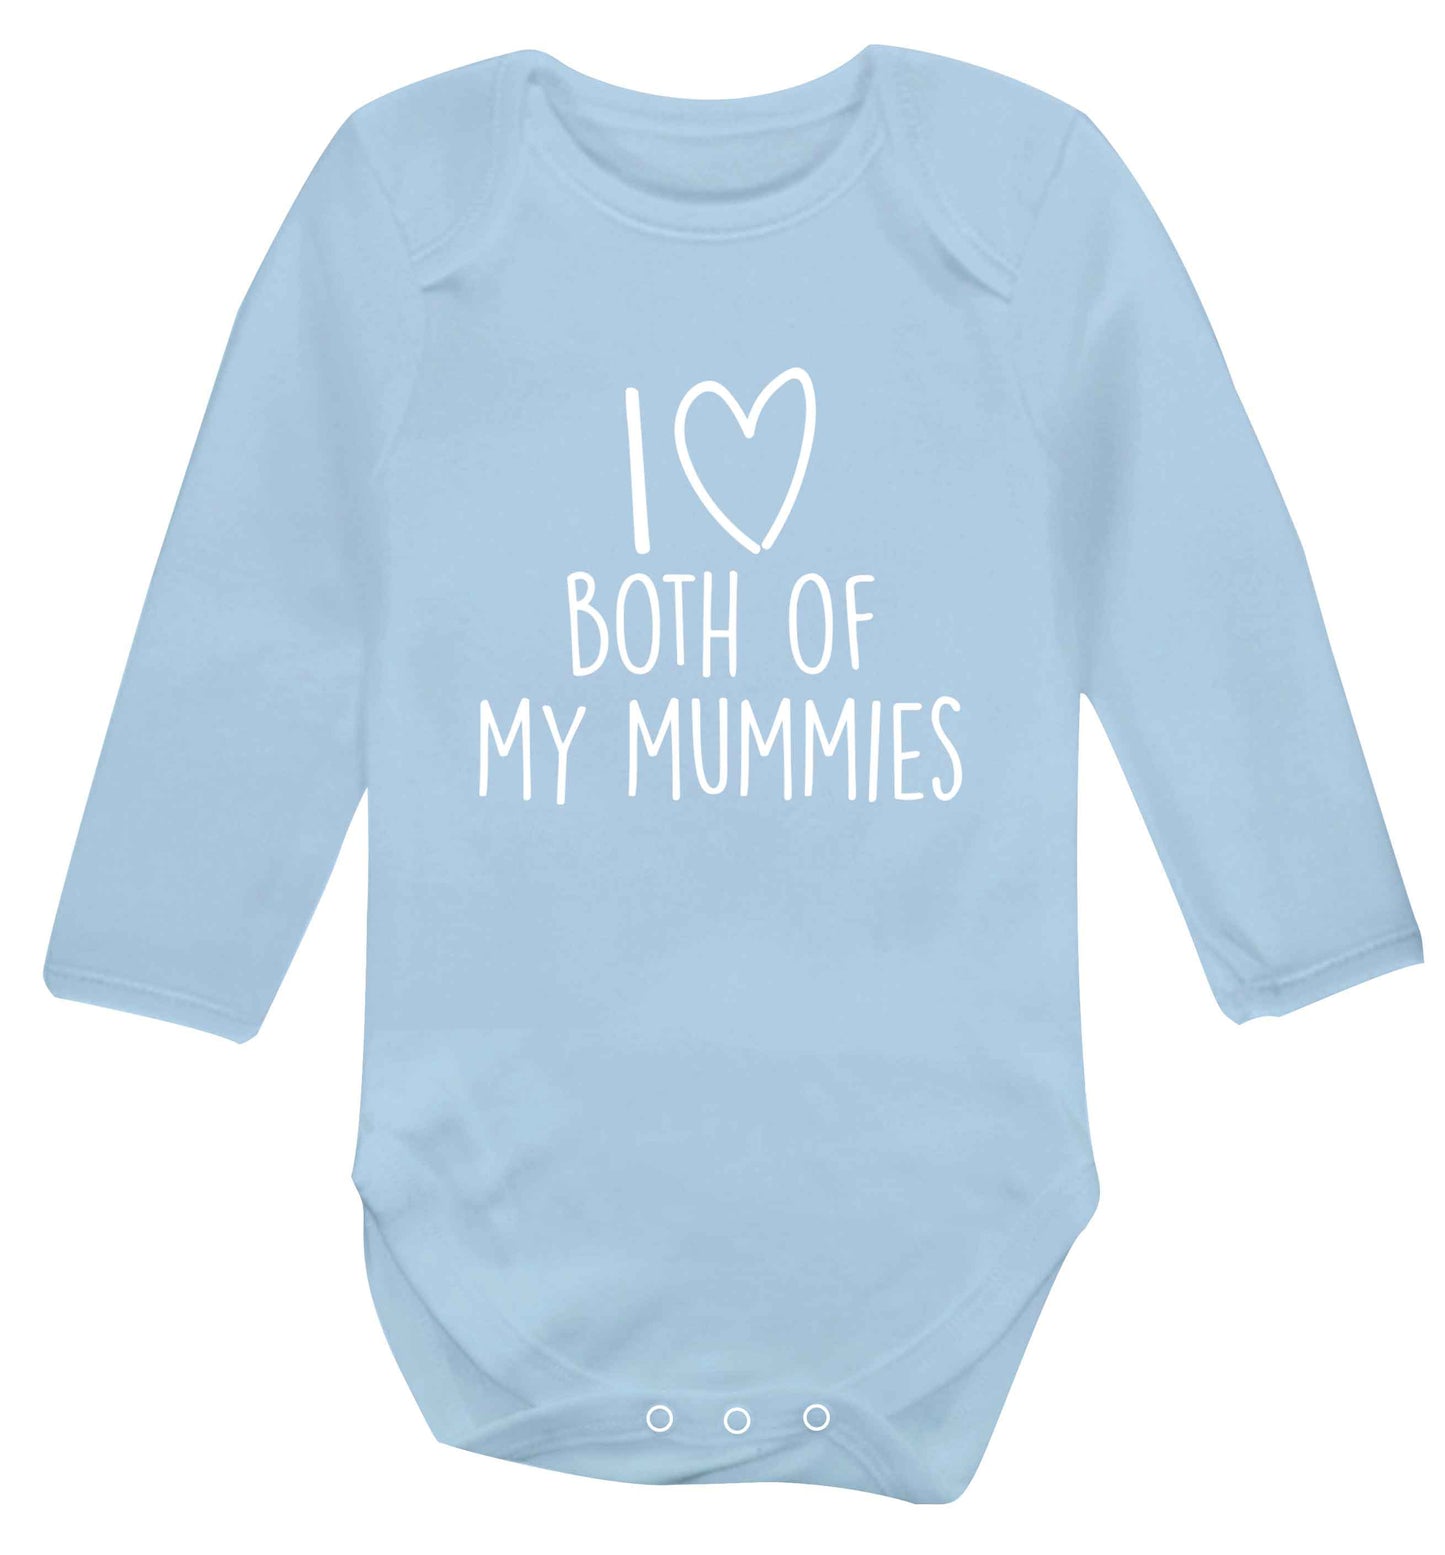 I love both of my mummies baby vest long sleeved pale blue 6-12 months